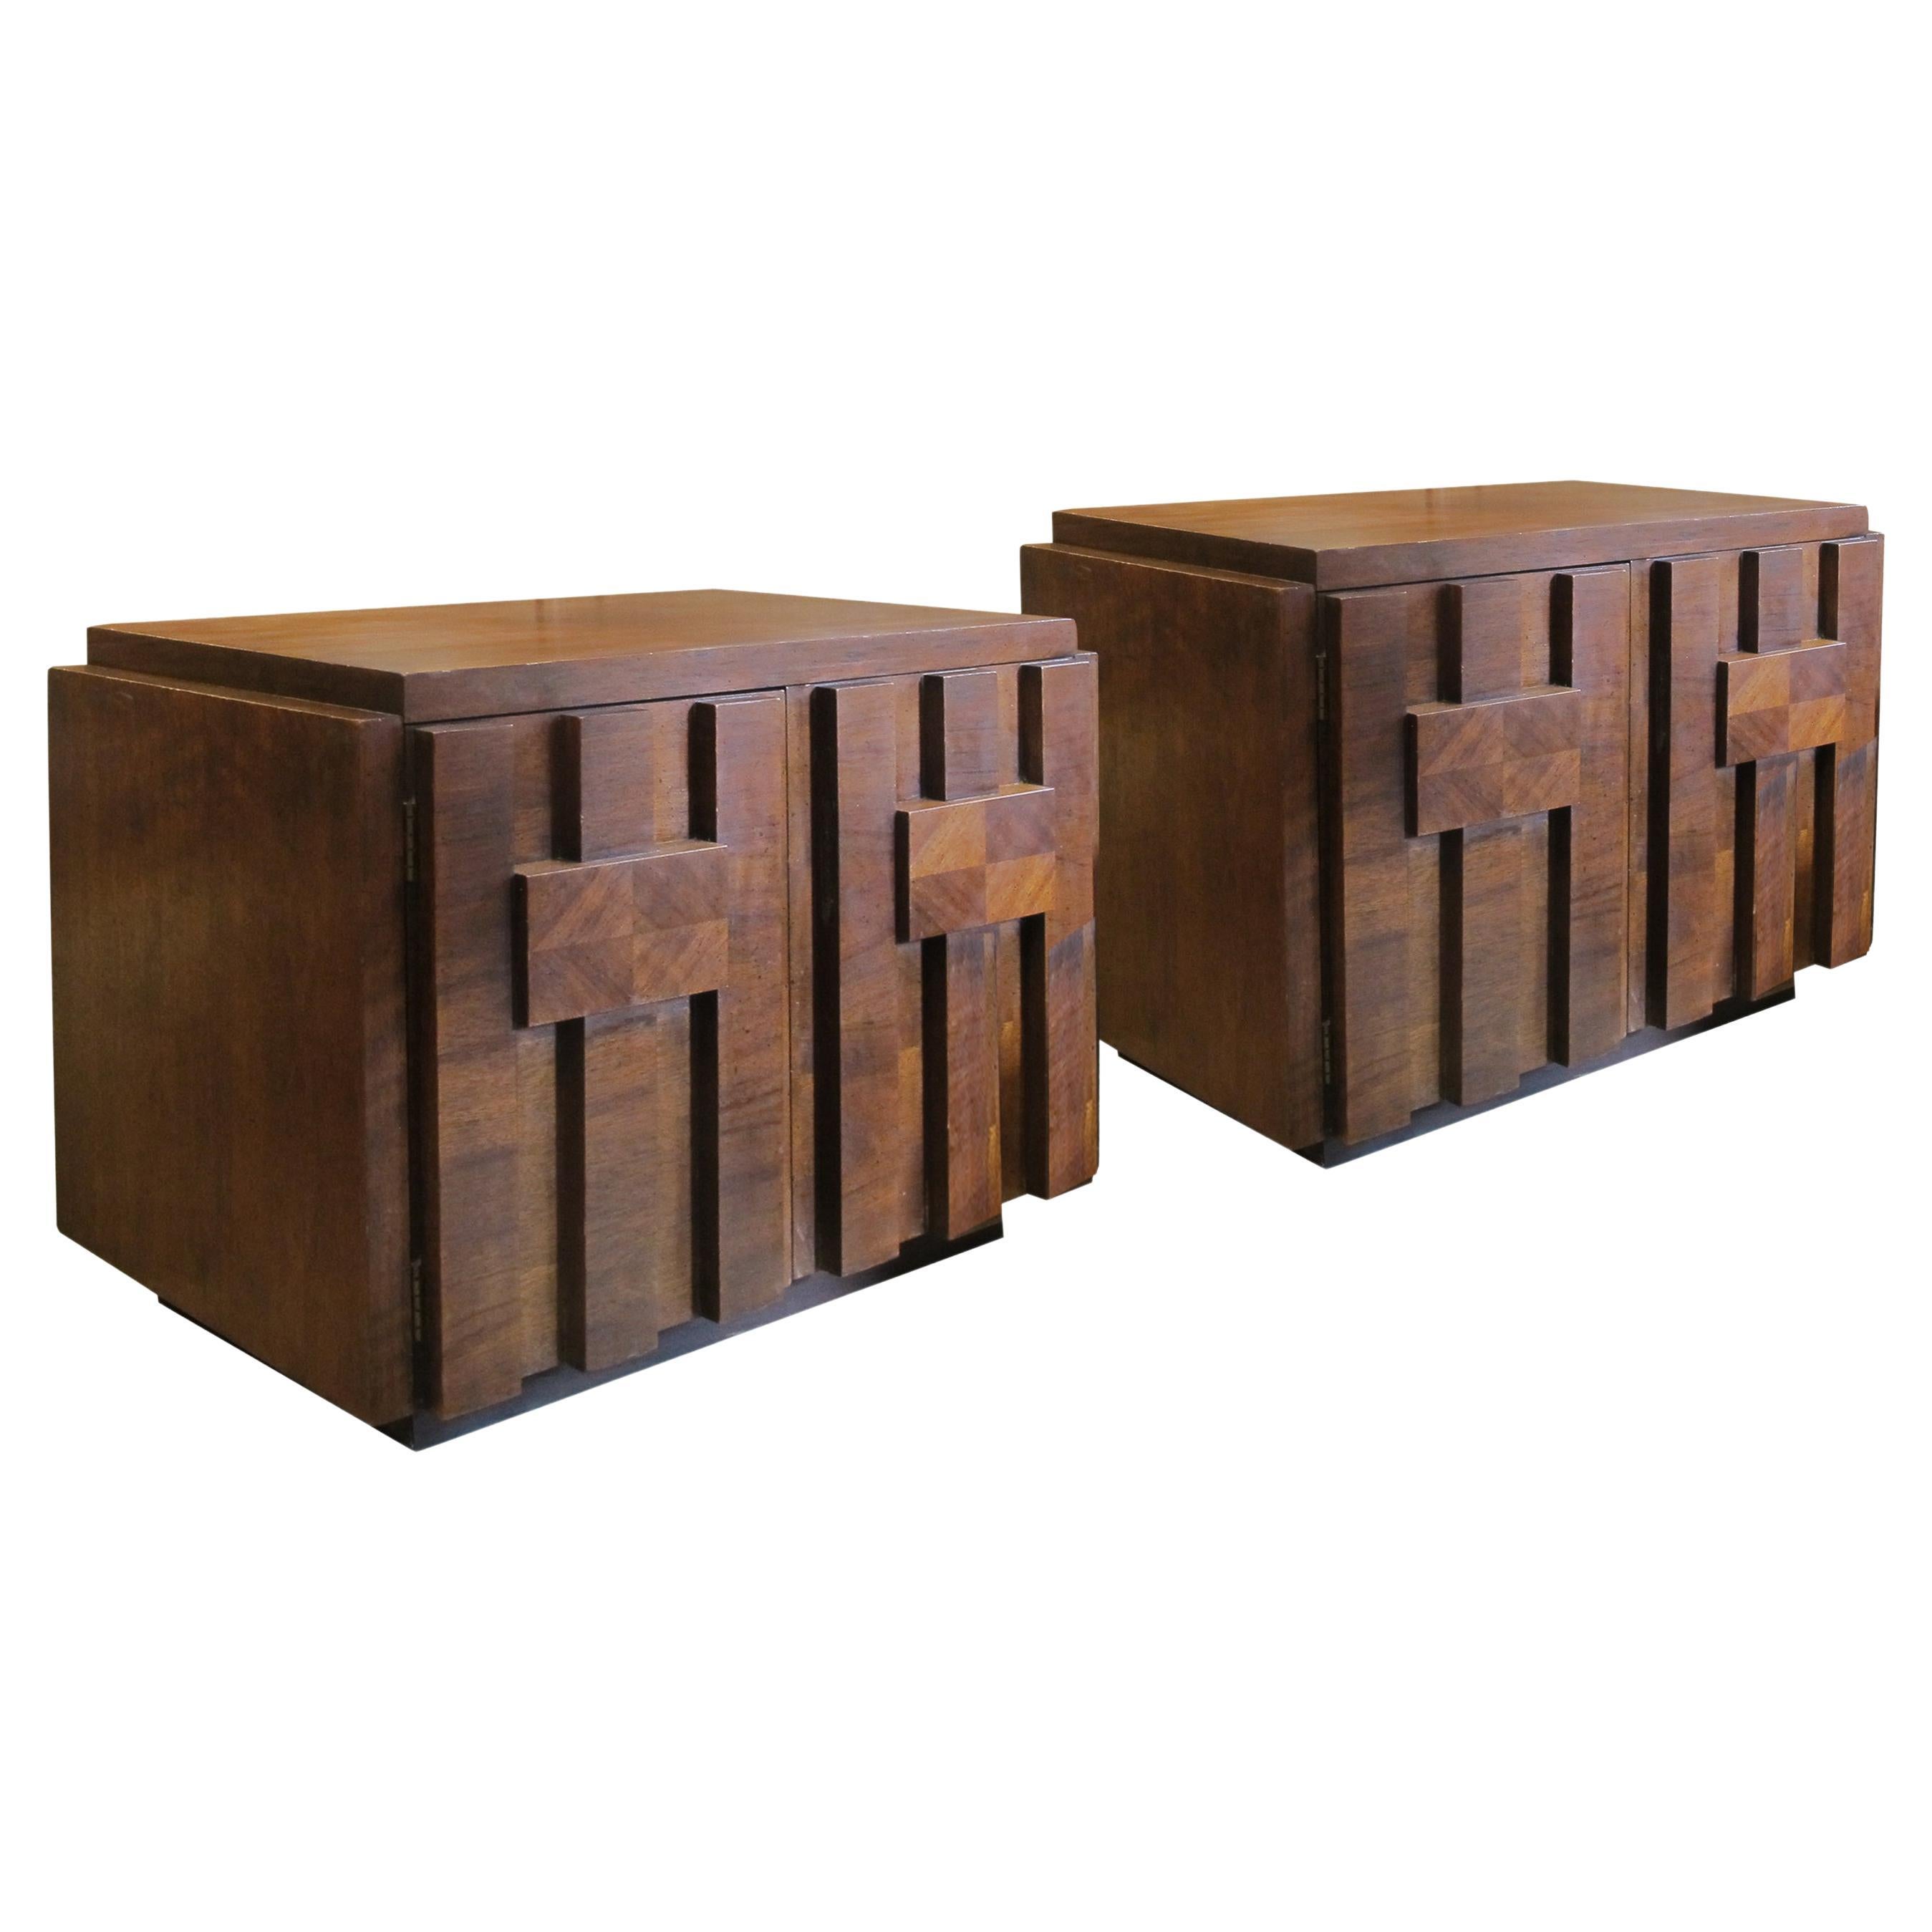 1960s Pair of “Brutalist” Walnut Staccato Paul Evan Bedside/End Tables by Lane